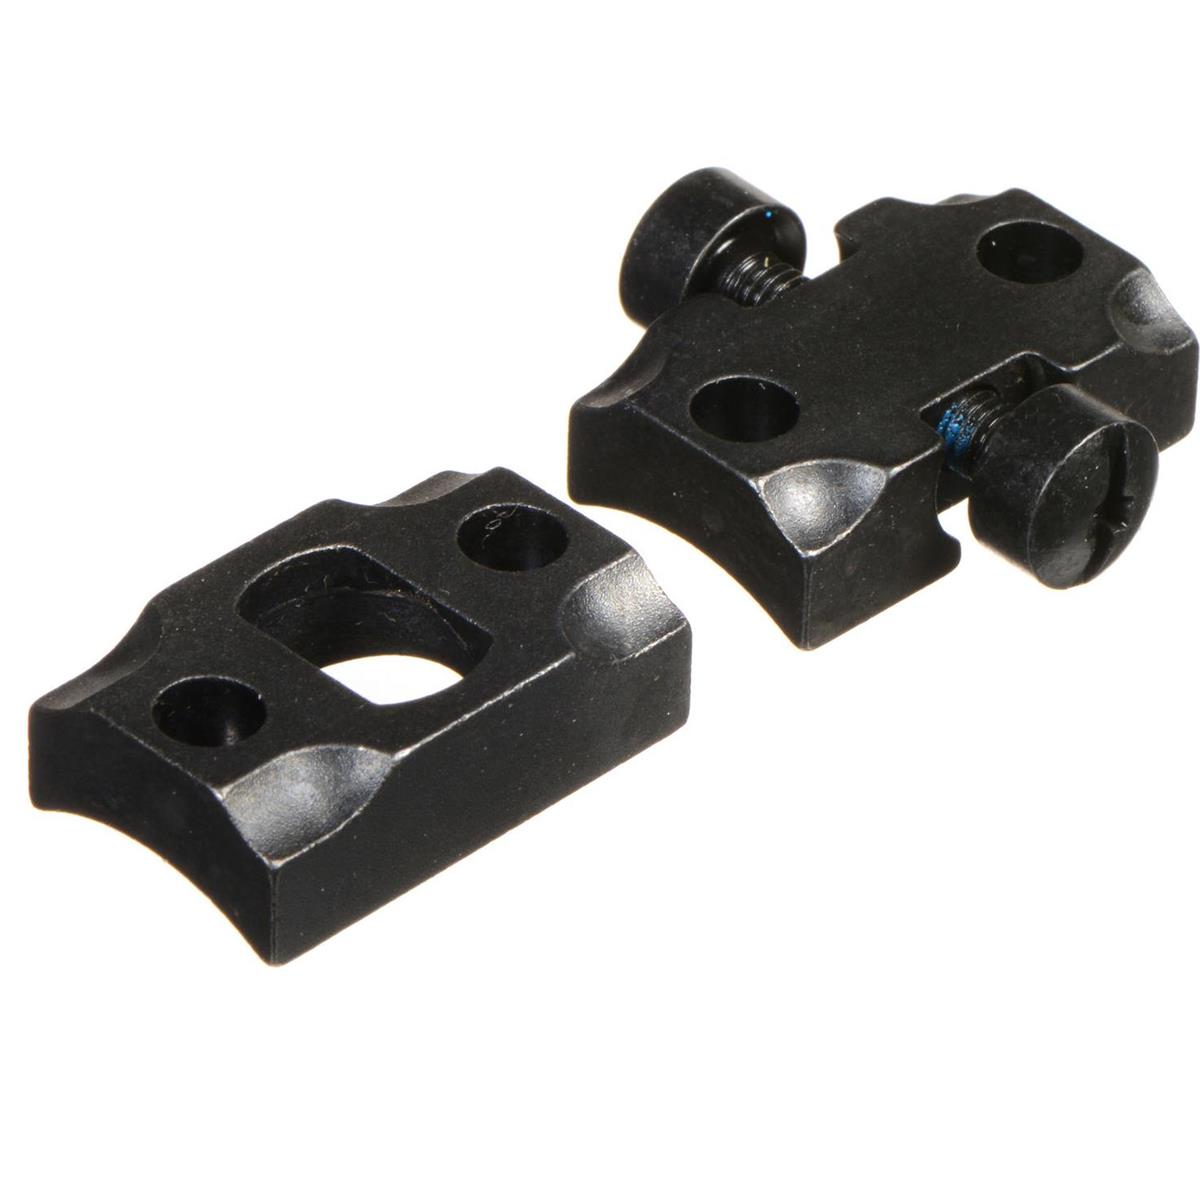 Image of Leupold Standard Two-Piece Mounting Base for Ruger American Rifles